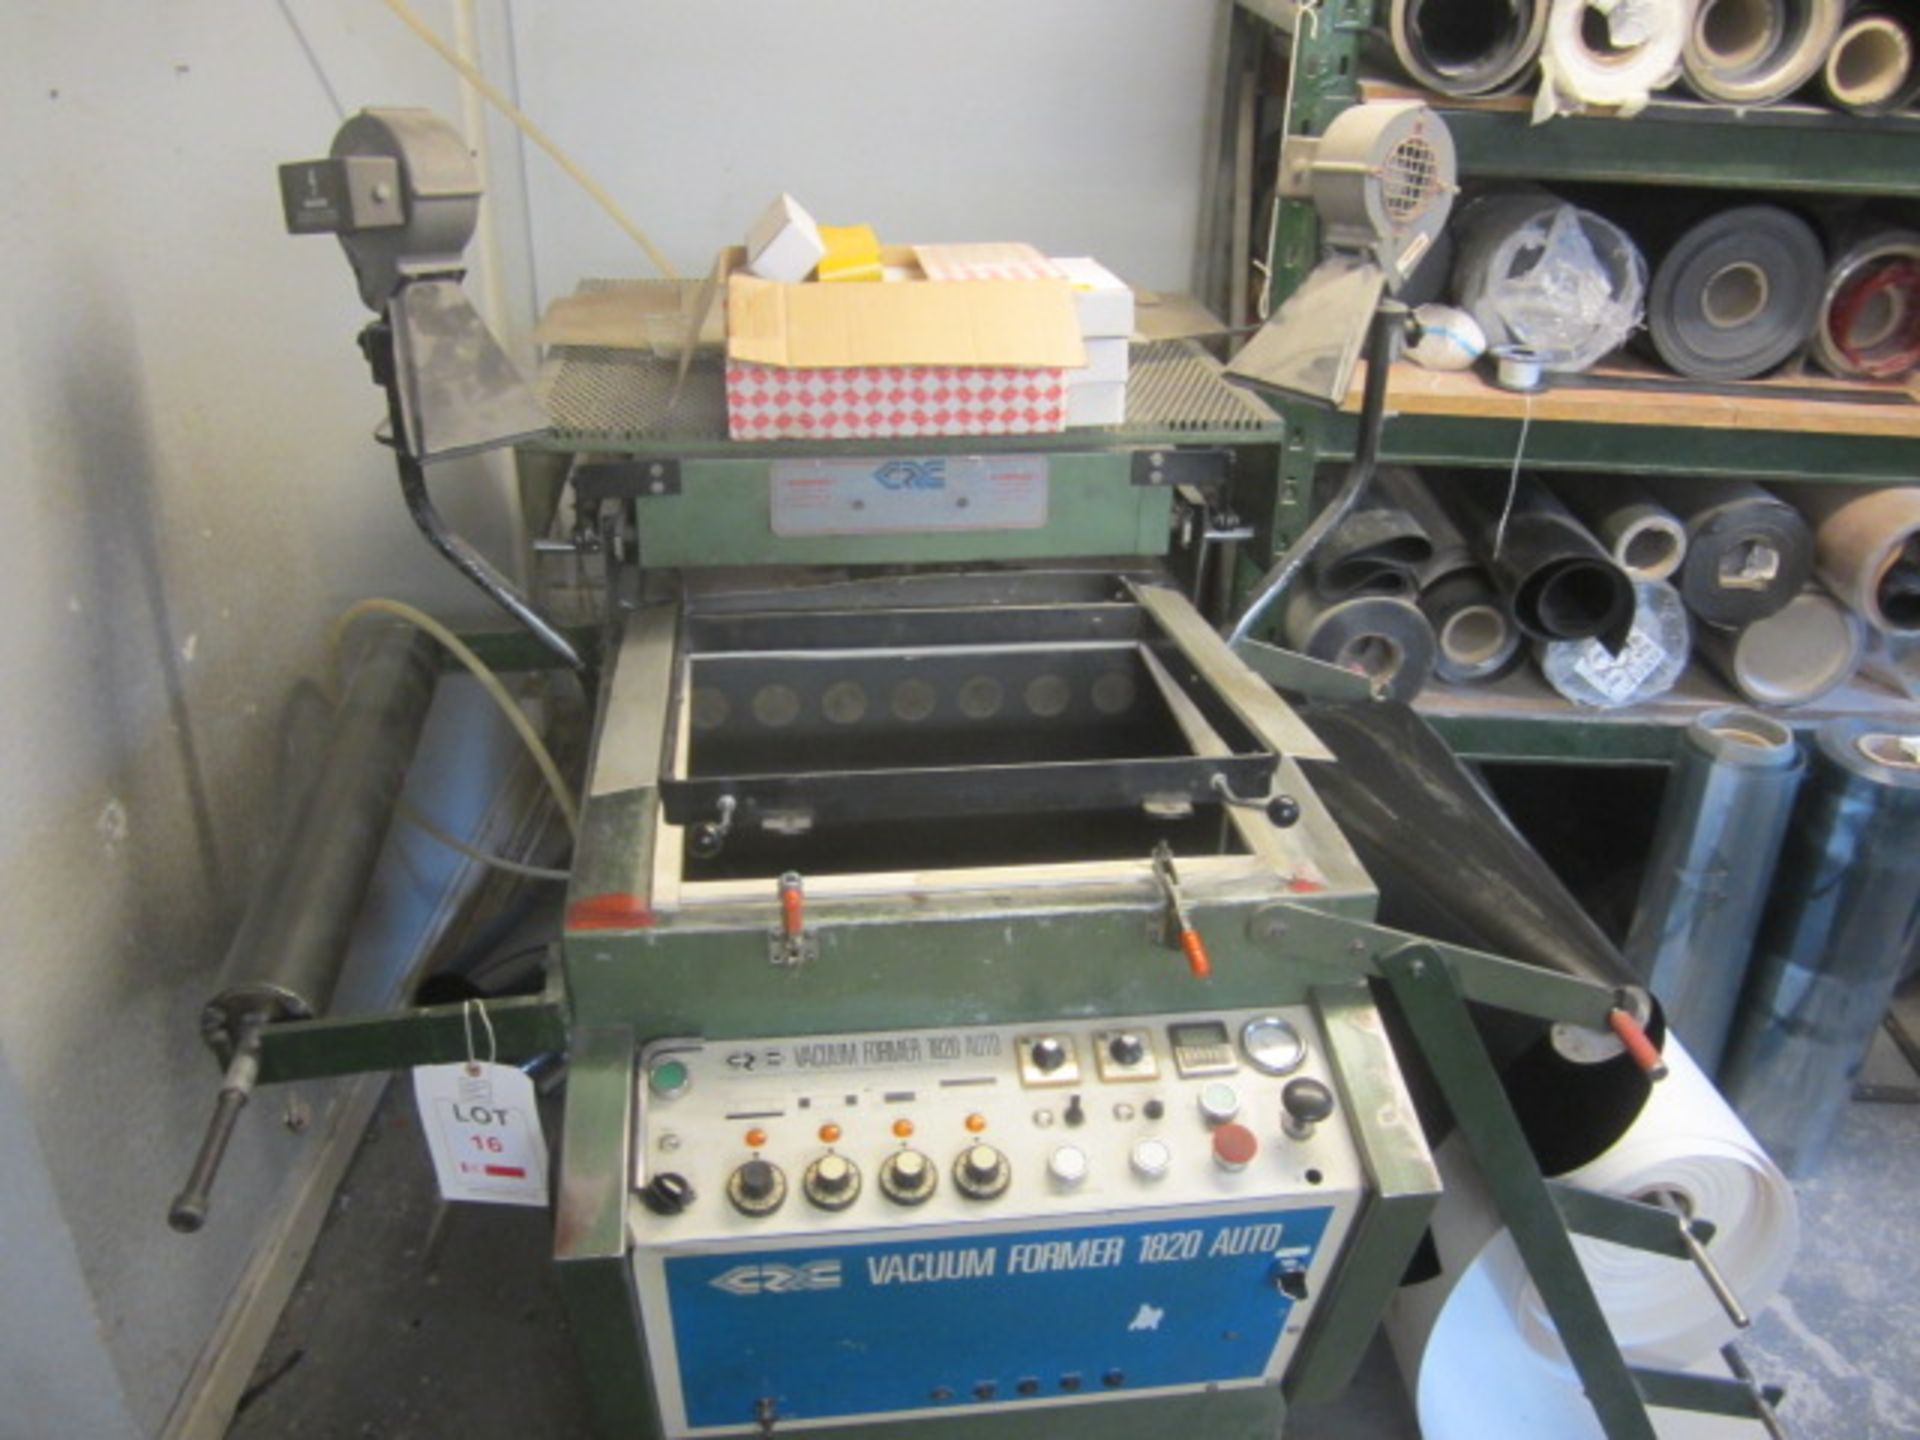 CRC 1820 auto vacuum former, 4 zone, manual platen raise with reel dispenser. Located at Supreme - Image 2 of 7